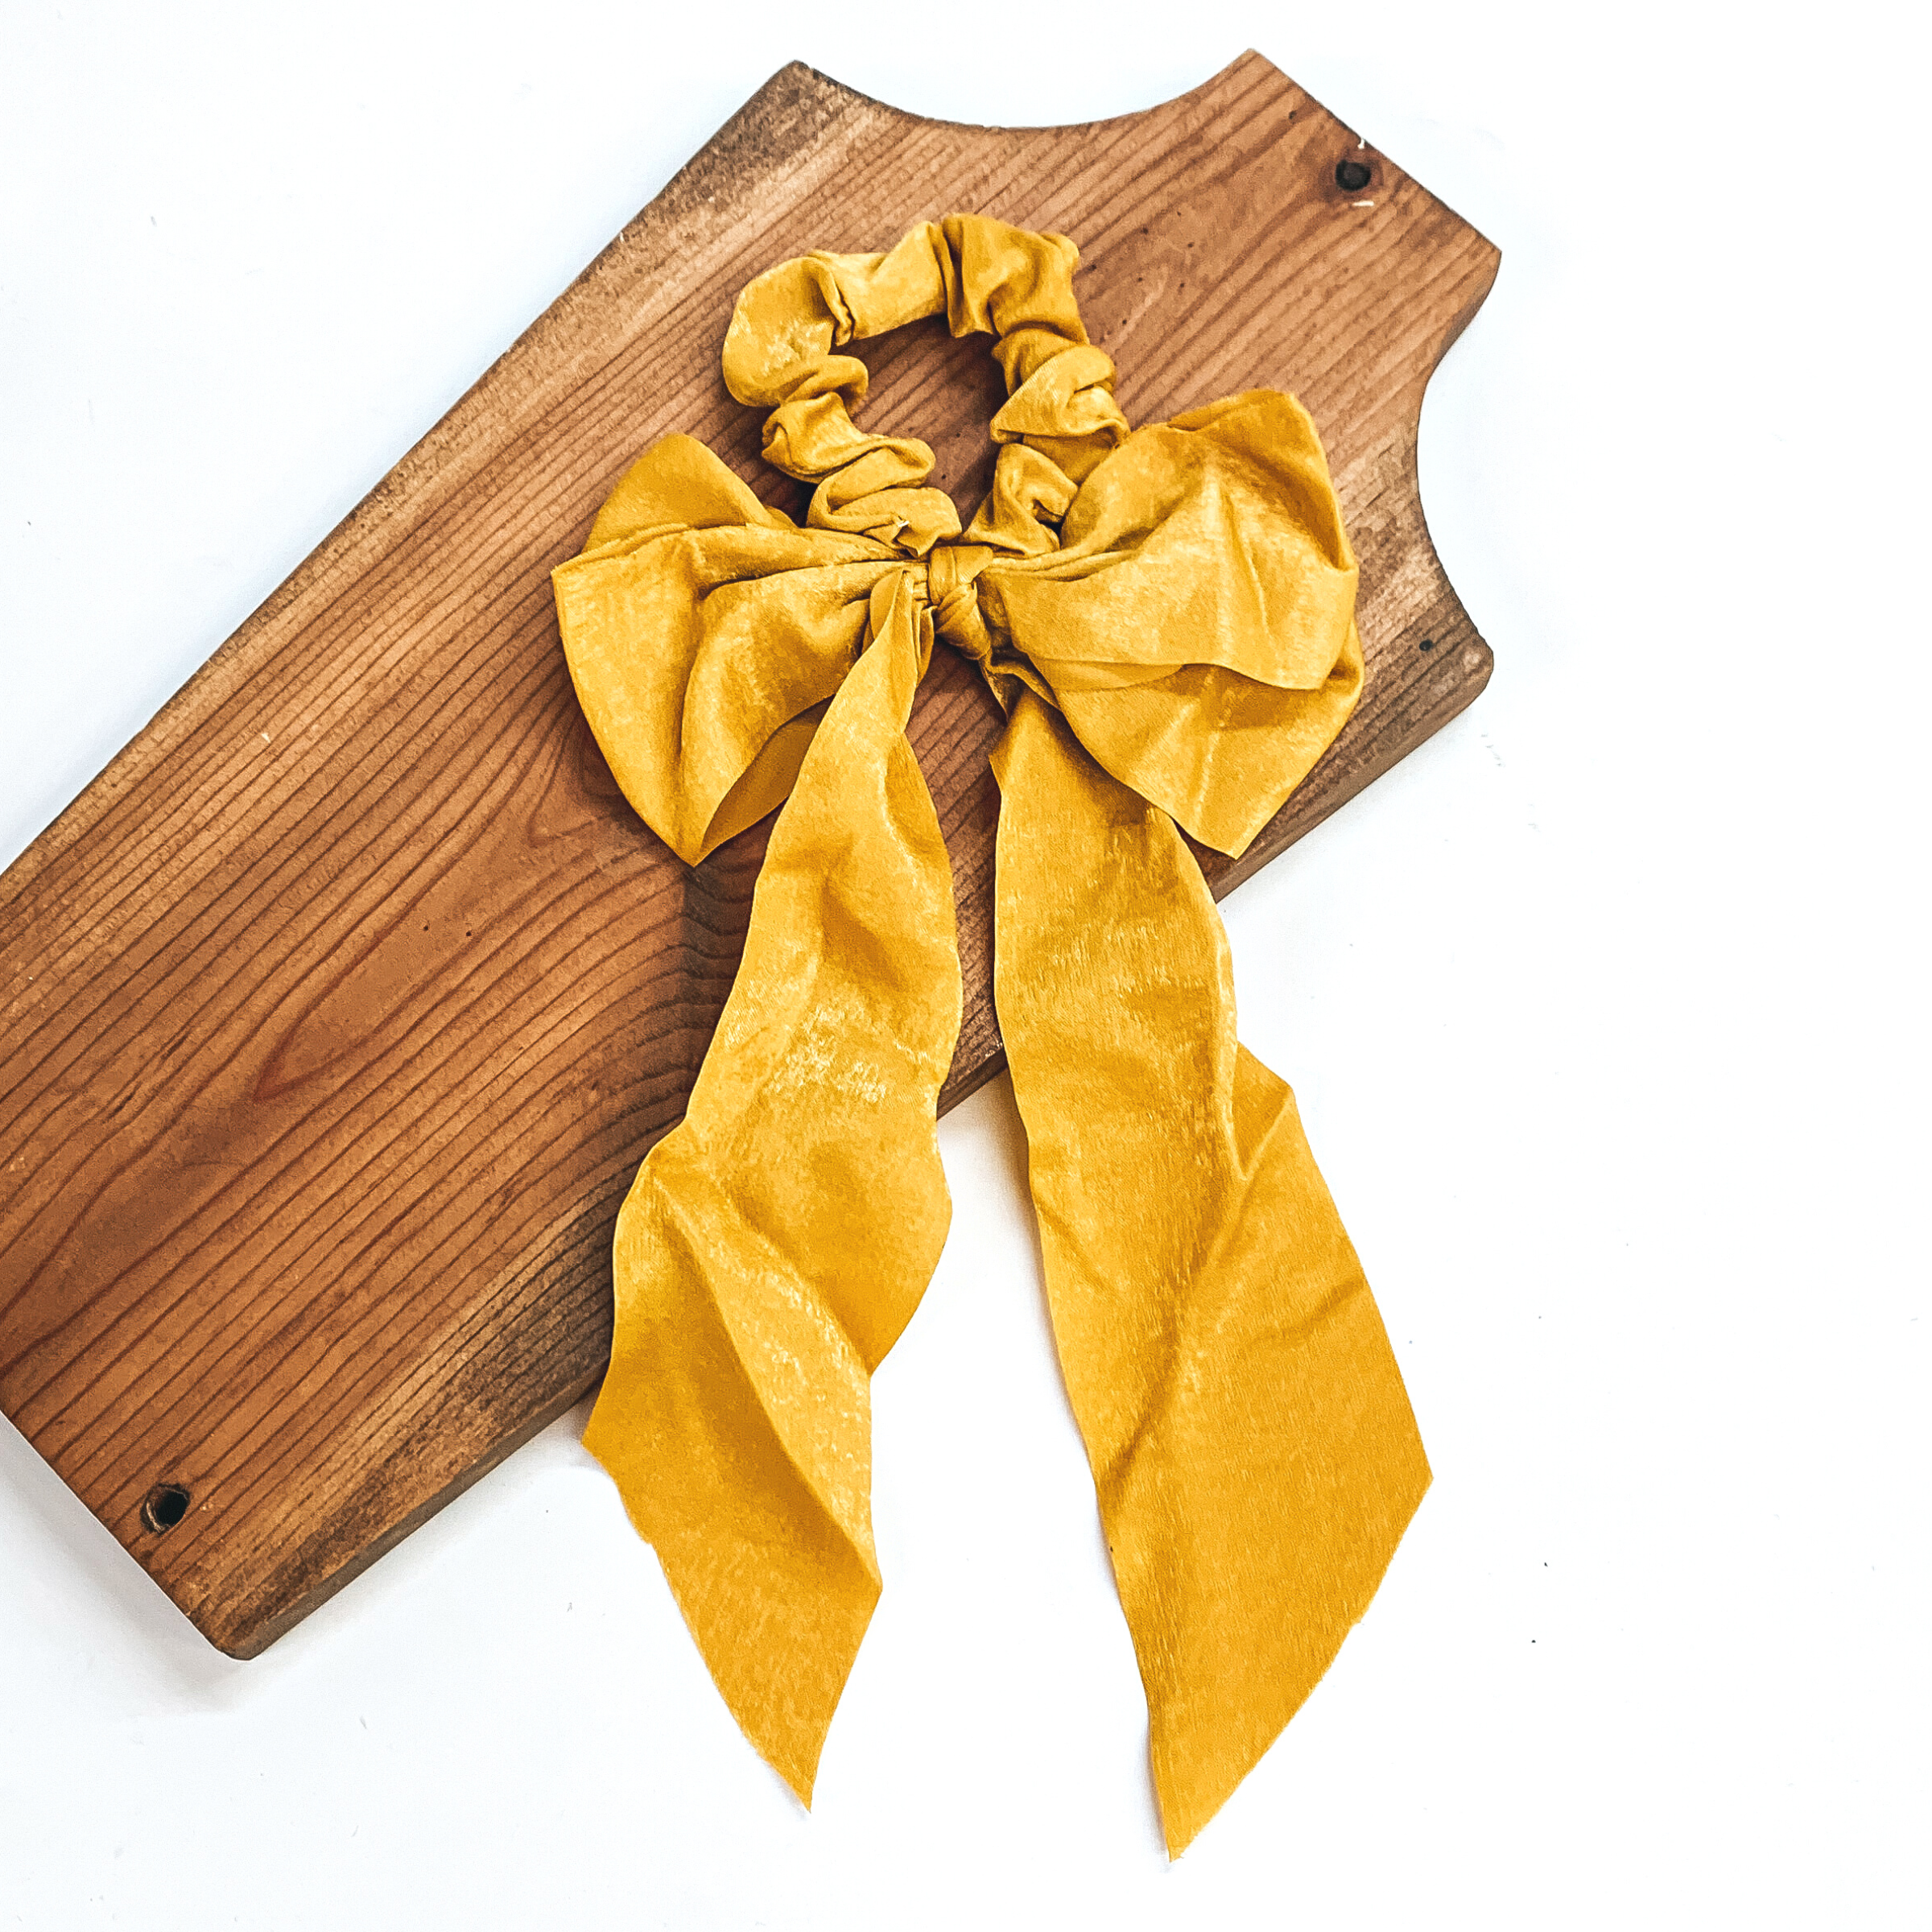 This is a mustard yellow satin scrunchie with a long bow, this scrunchie is taken on  a brown necklace board and on a white background.